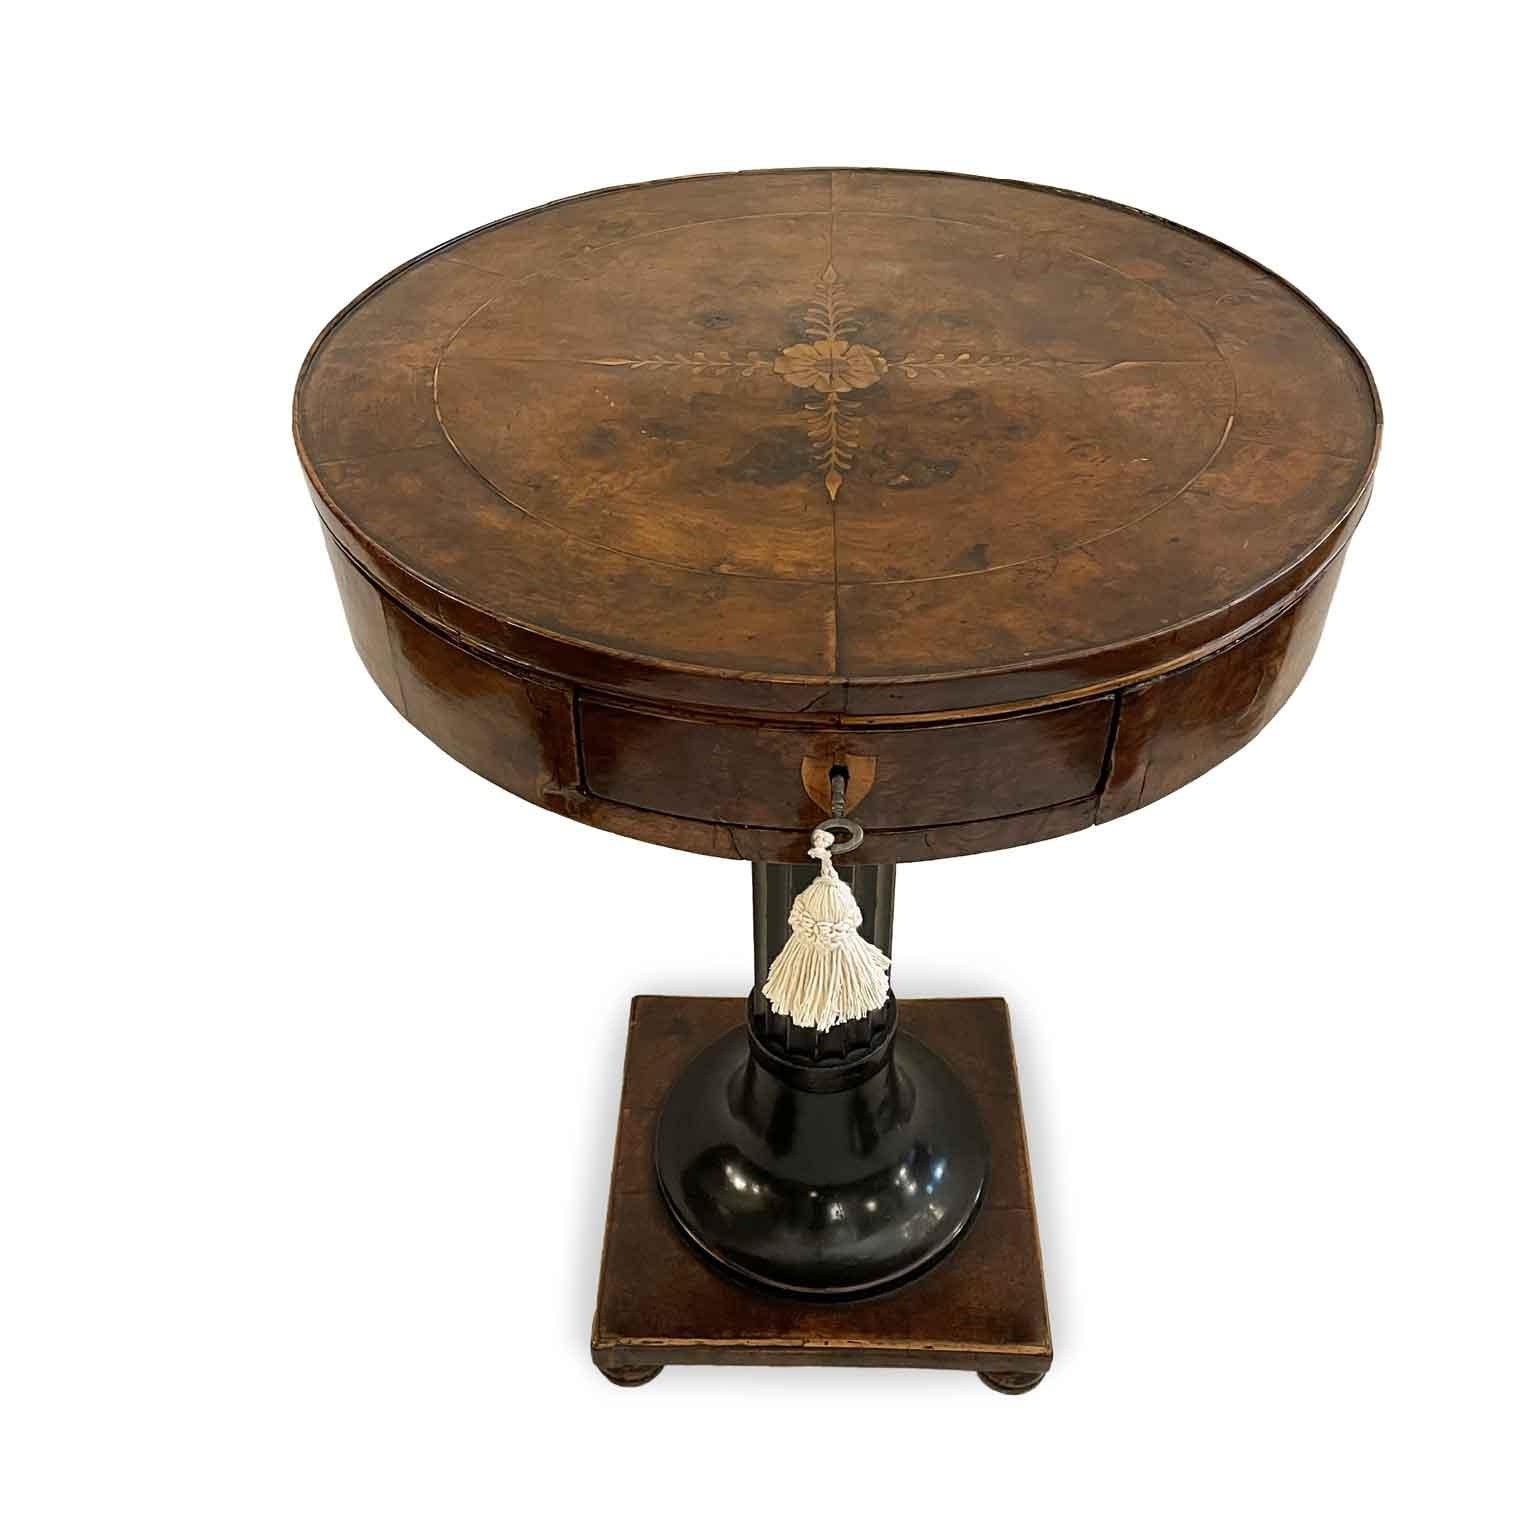 Empire Coffee Table Early 1800s Circular with Drawer on Square Base with a  turned central support in ebonized wood, a fluted column in the central part that connects to the circular top with the walnut-paneled band in which a drawer opens: at the